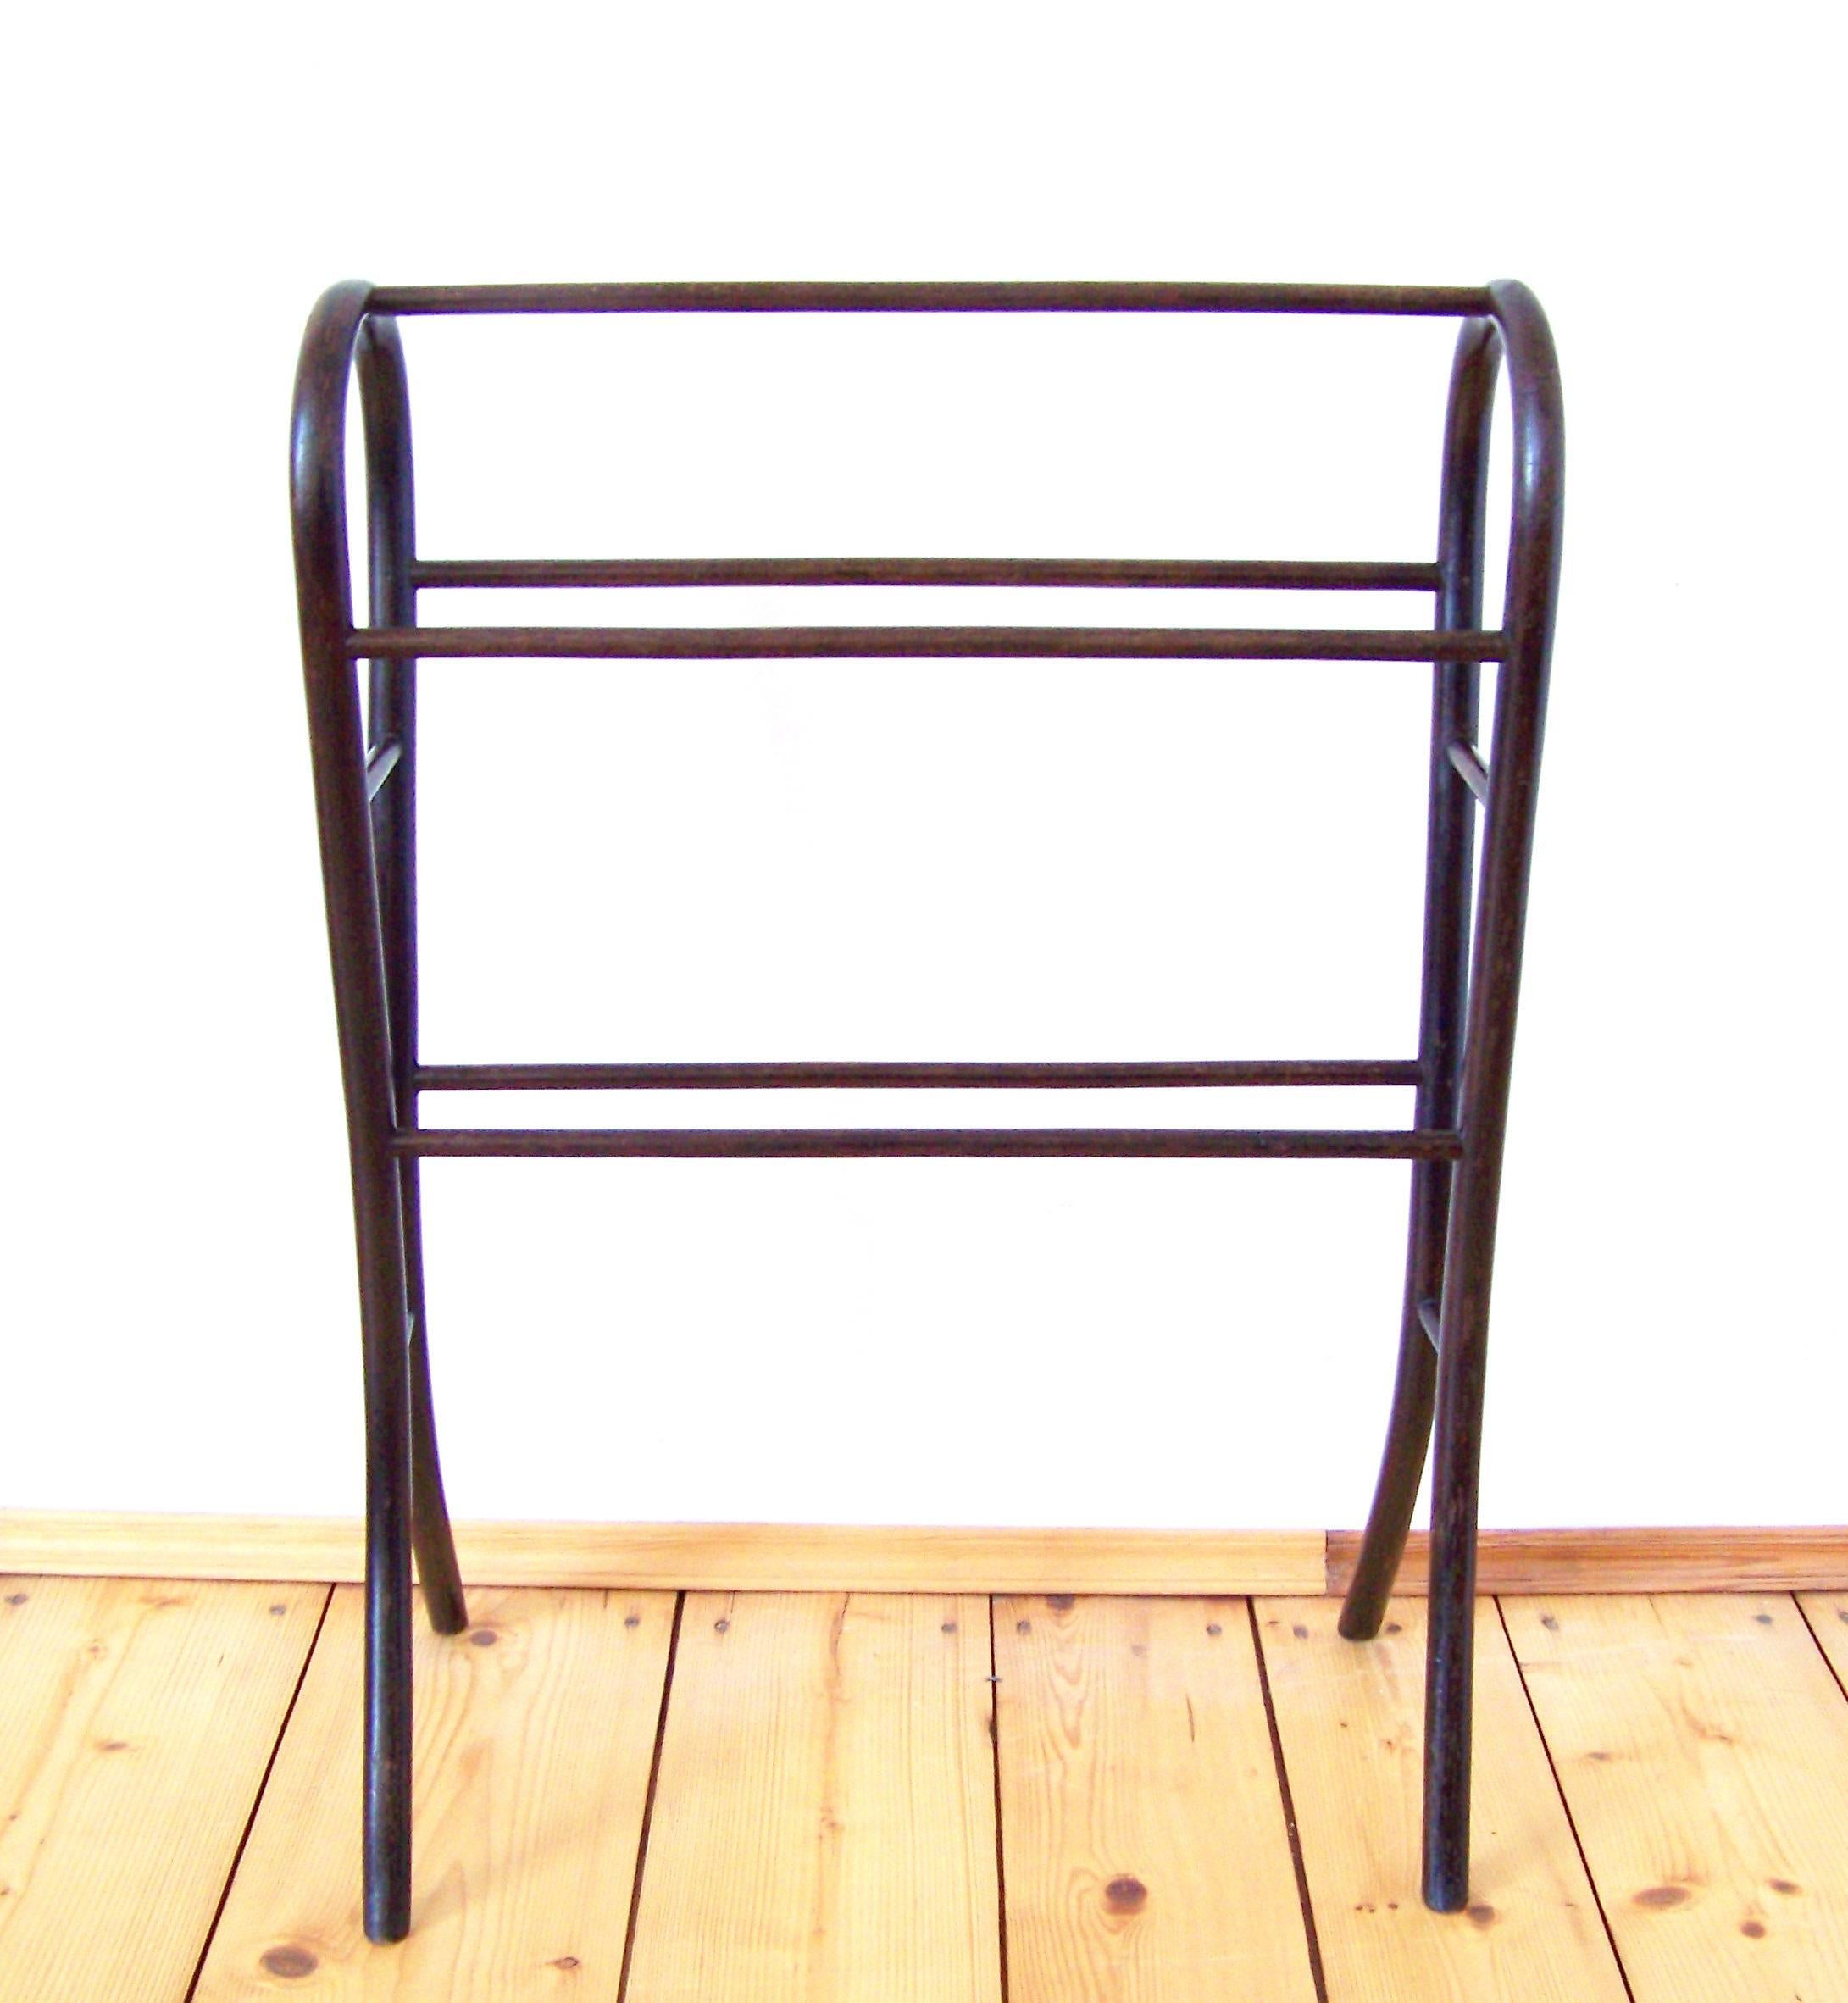 Viennese towel rack Thonet Nr. 6575 was included in the production program of the company Gebrüder Thonet in 1904. Original state.